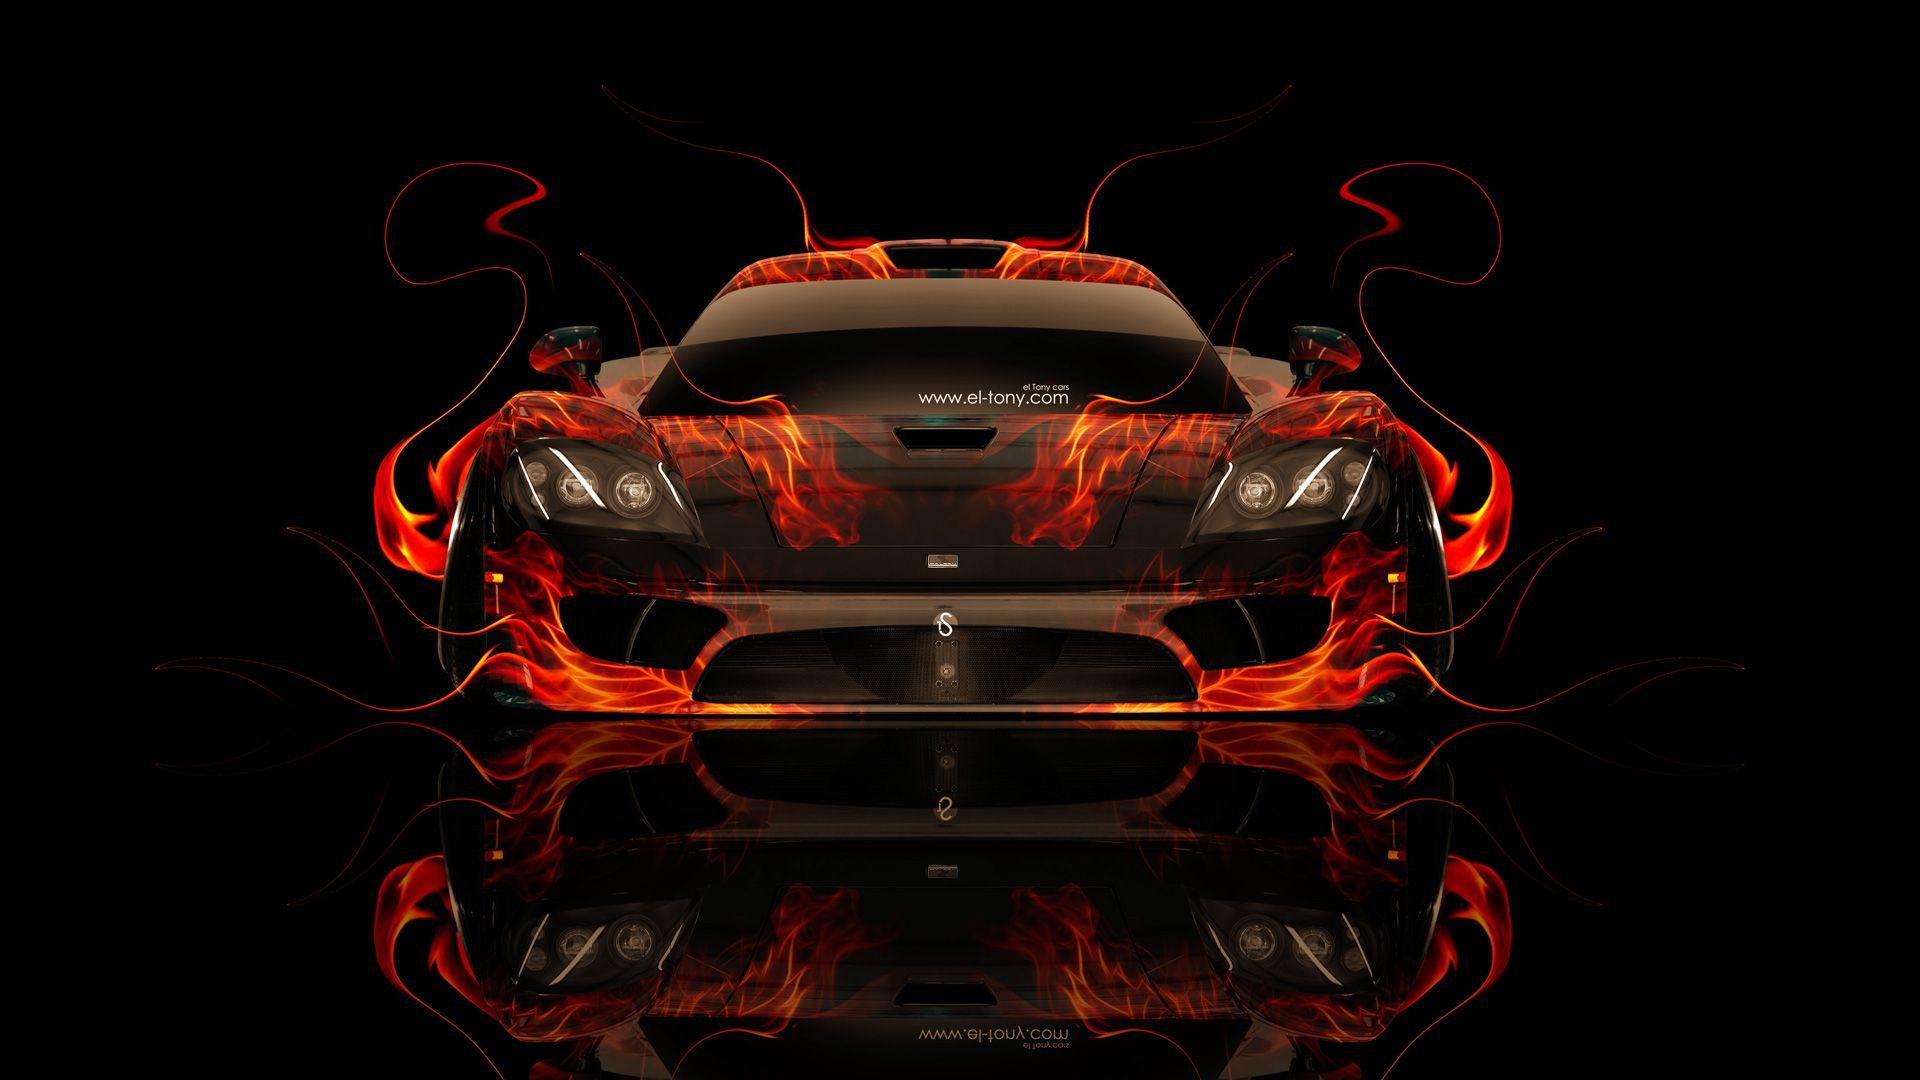 Saleen S7 Front Fire Abstract Car 2014